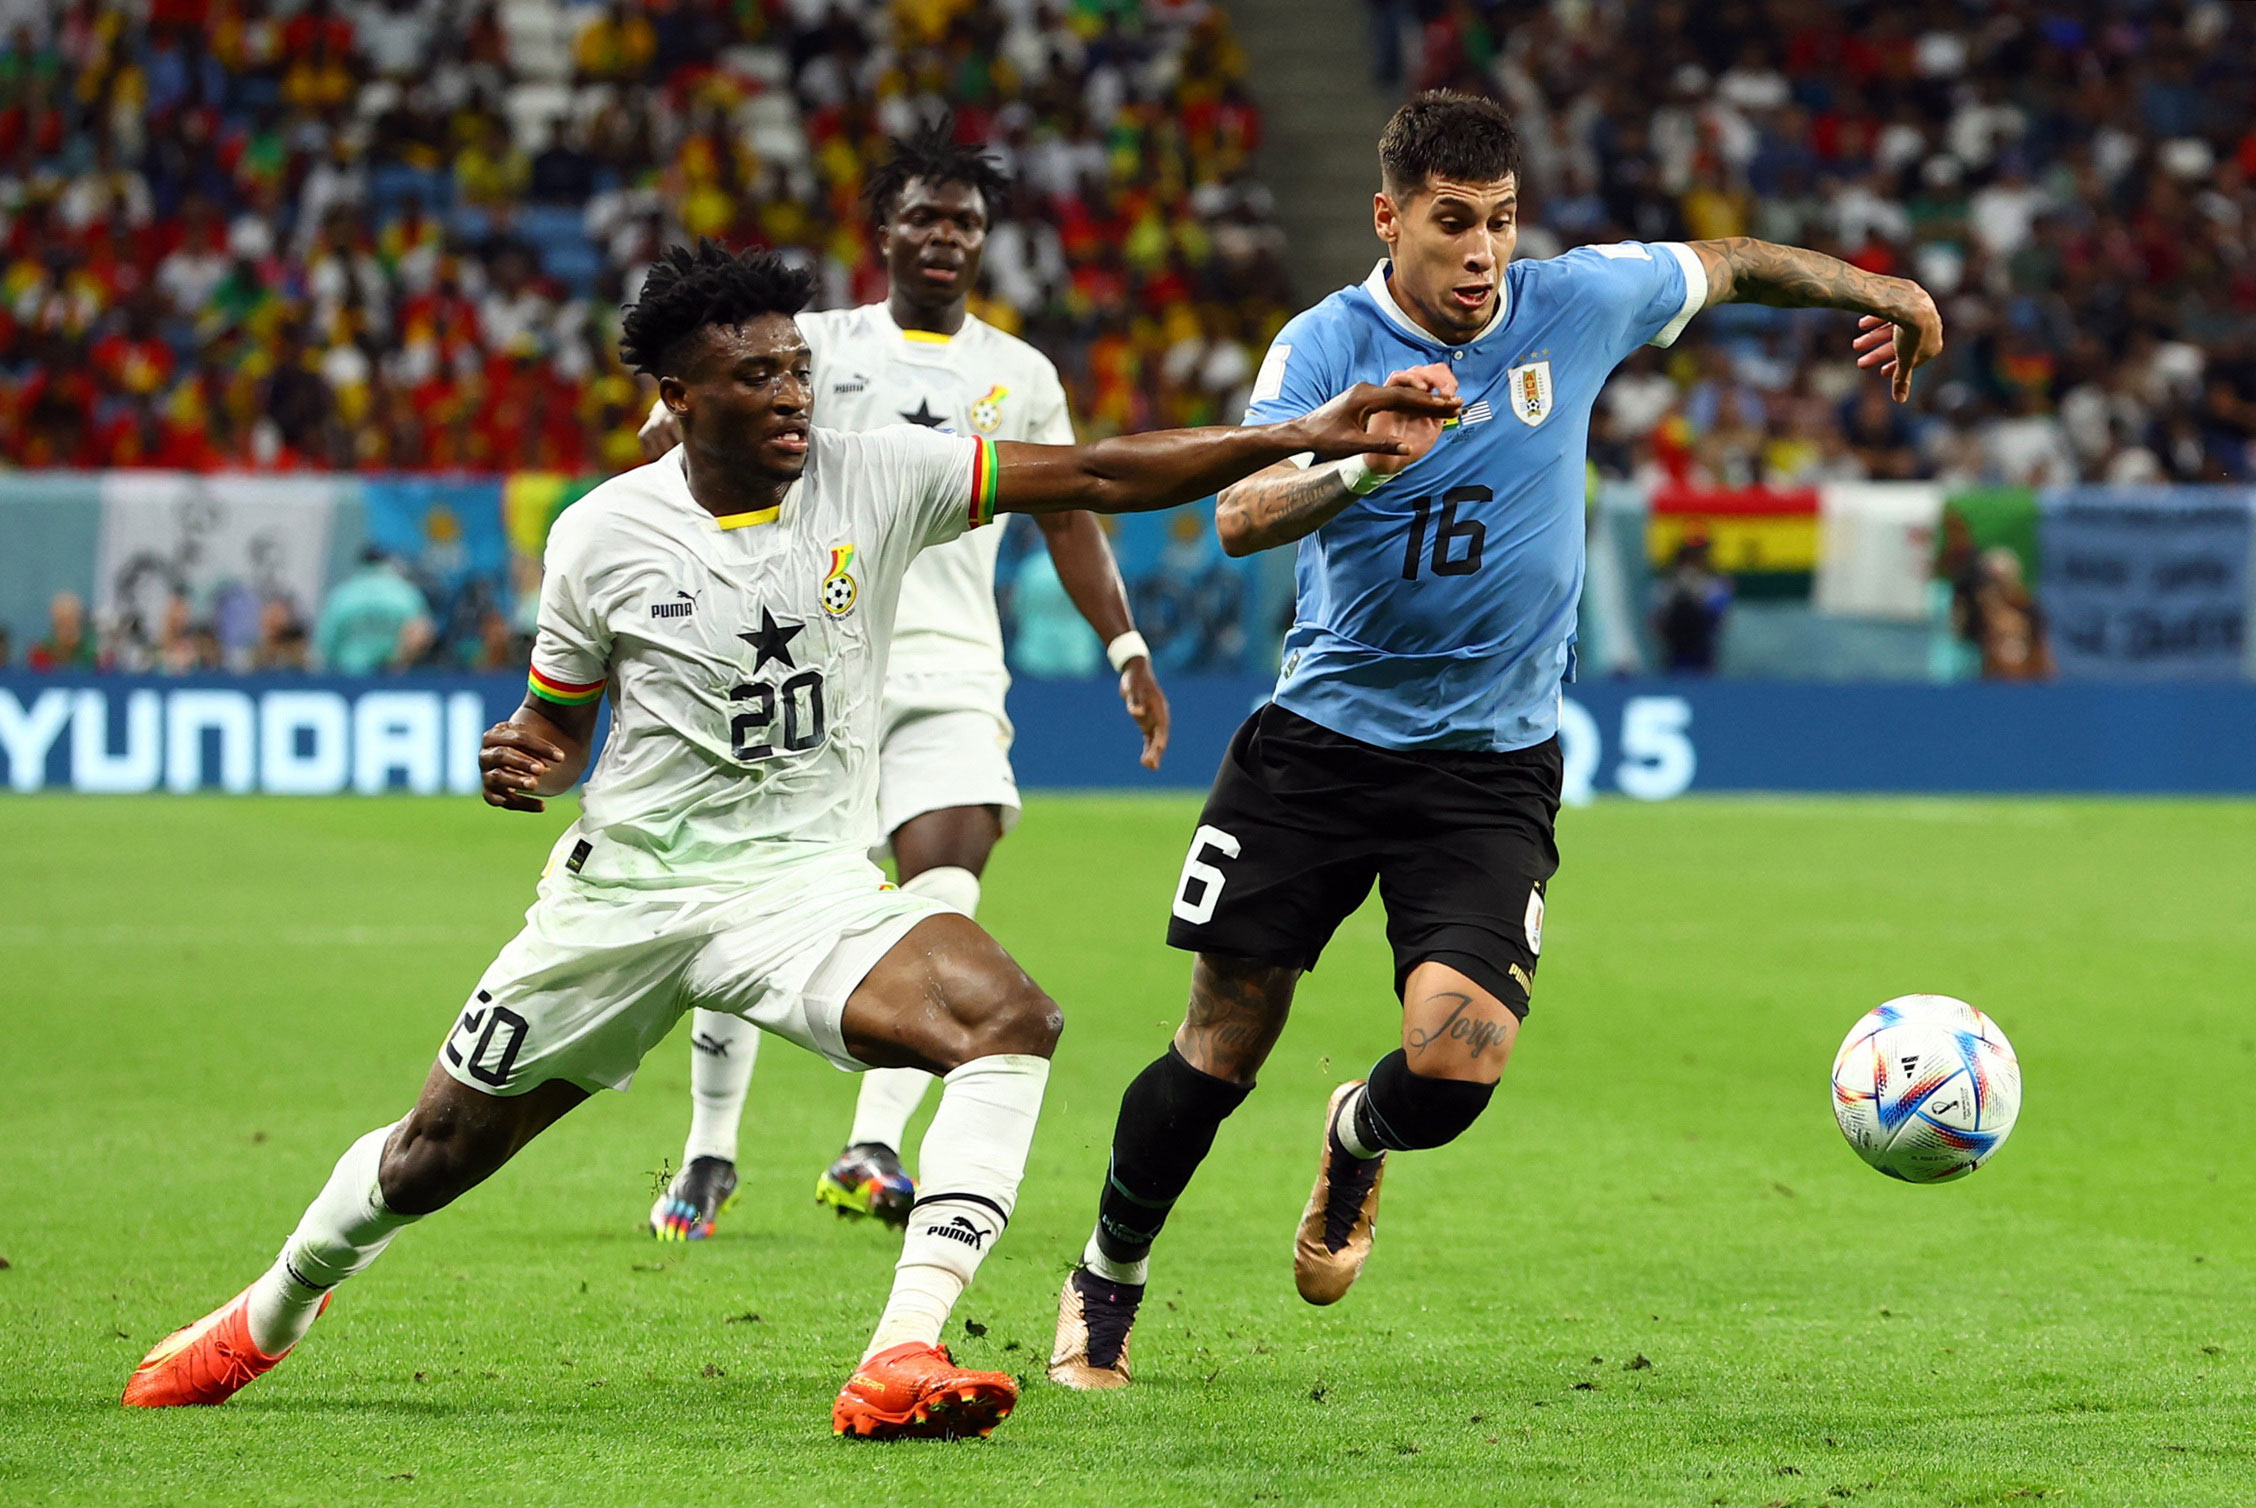 Uruguay's Mathias Olivera, right, in action with Ghana's Mohammed Kudus on Friday.